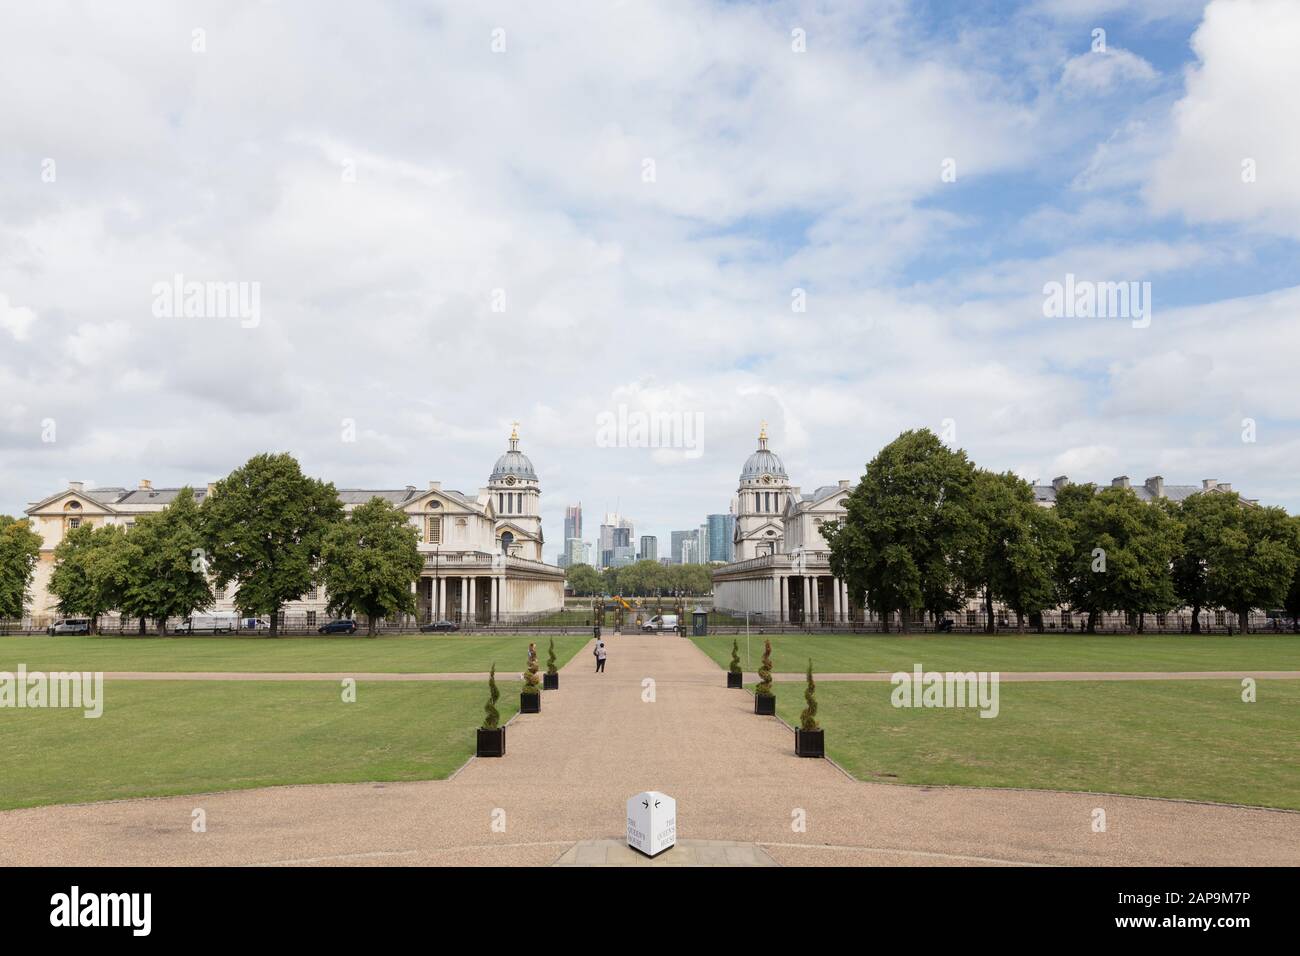 Royal Naval College in Greenwich, London, England Stockfoto